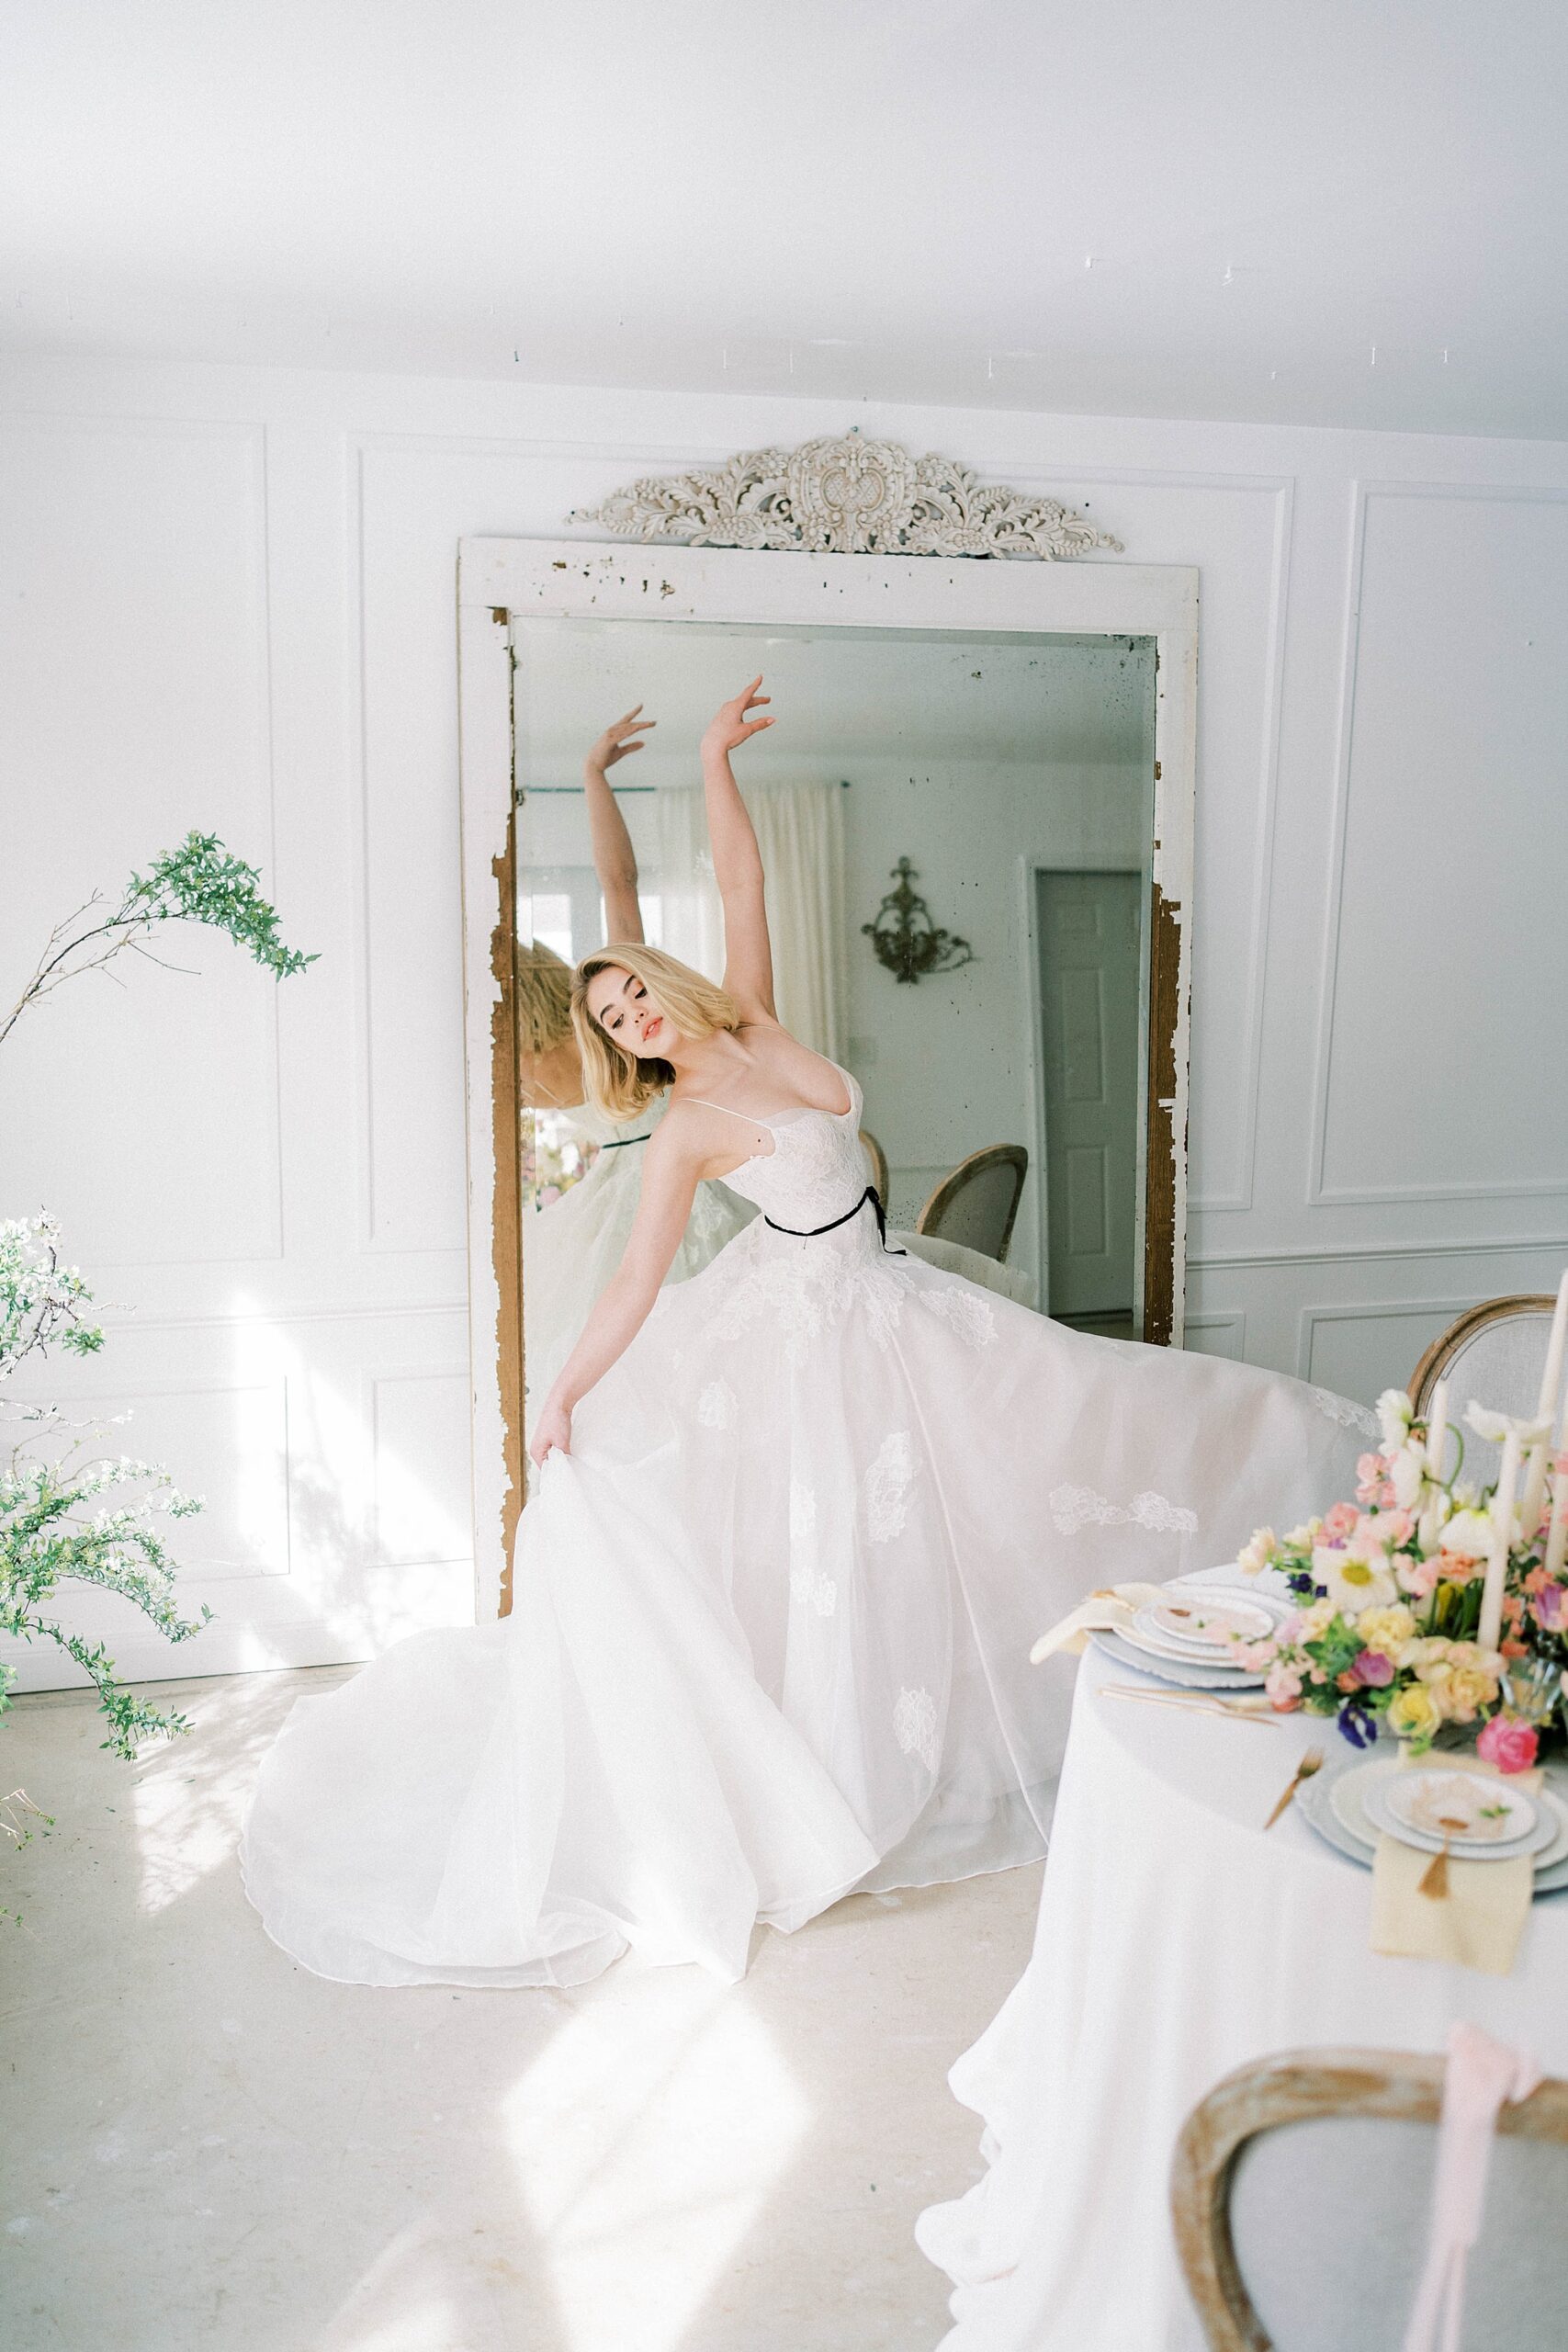 graceful movements by bride during Ballet-Inspired Bridal Shoot